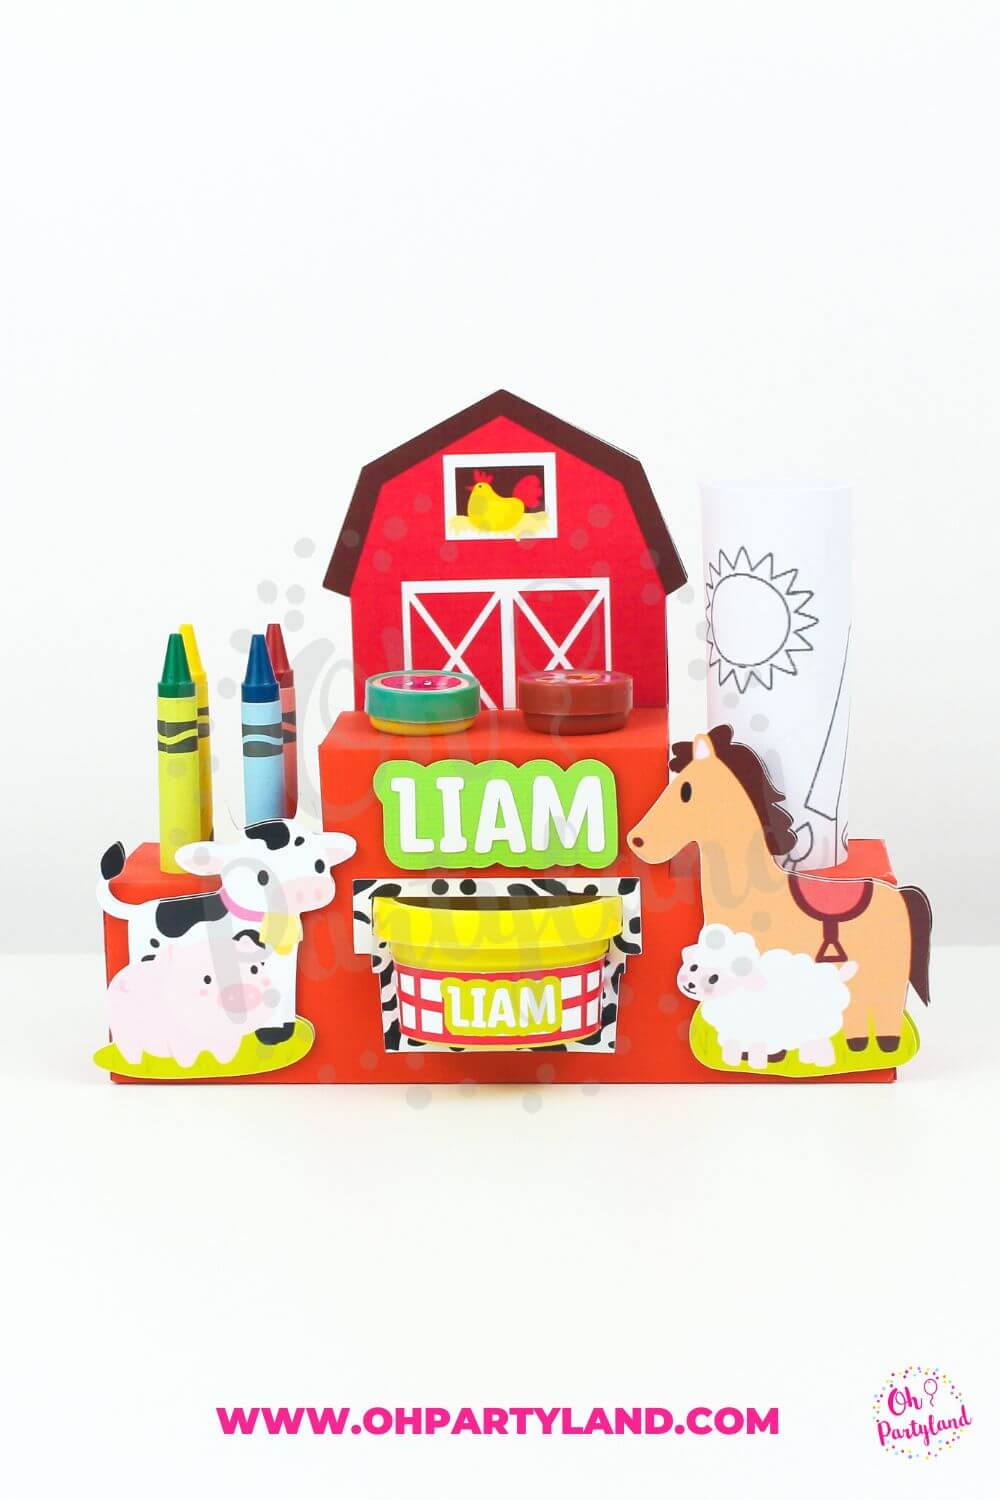 Activity box template for play doh, stampers and crayons